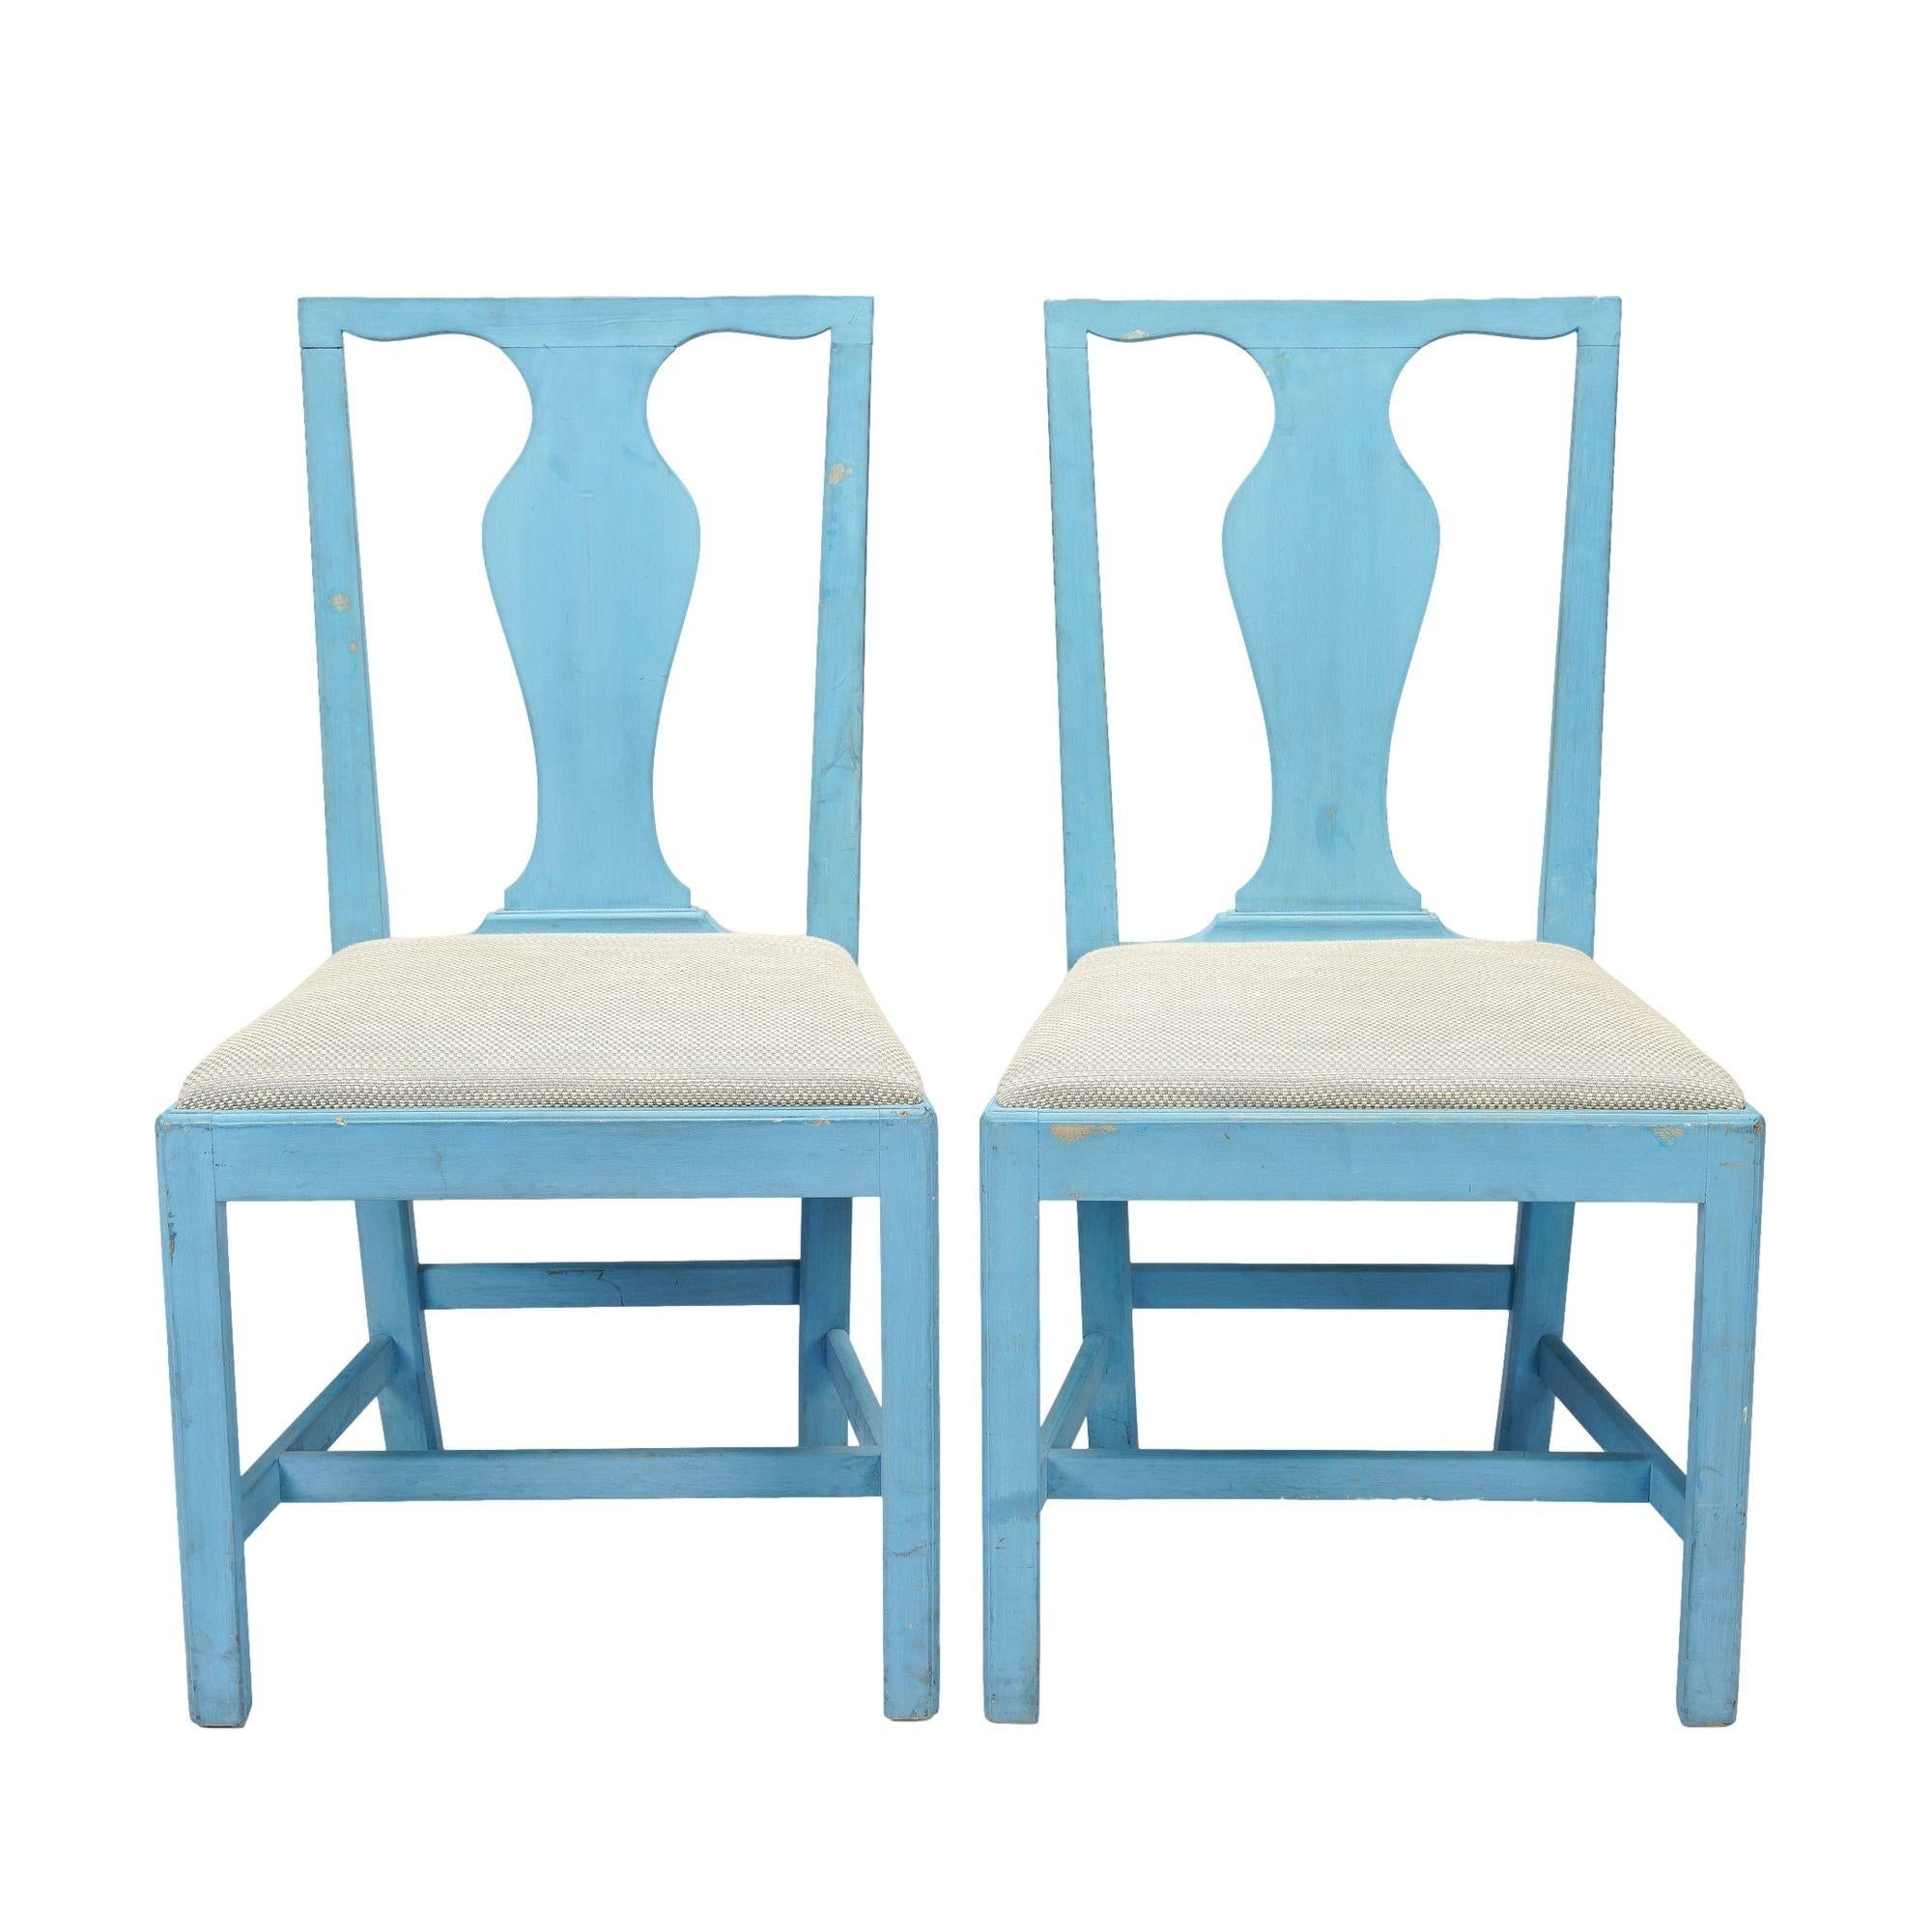 Pair of Academic Revival mahogany slip seat side chairs in a blue milk paint after an 18th century Virginia model. The chairs feature a solid splat, a straight horizontal crest rail, and newly reupholstered seats.
American, circa 1940.